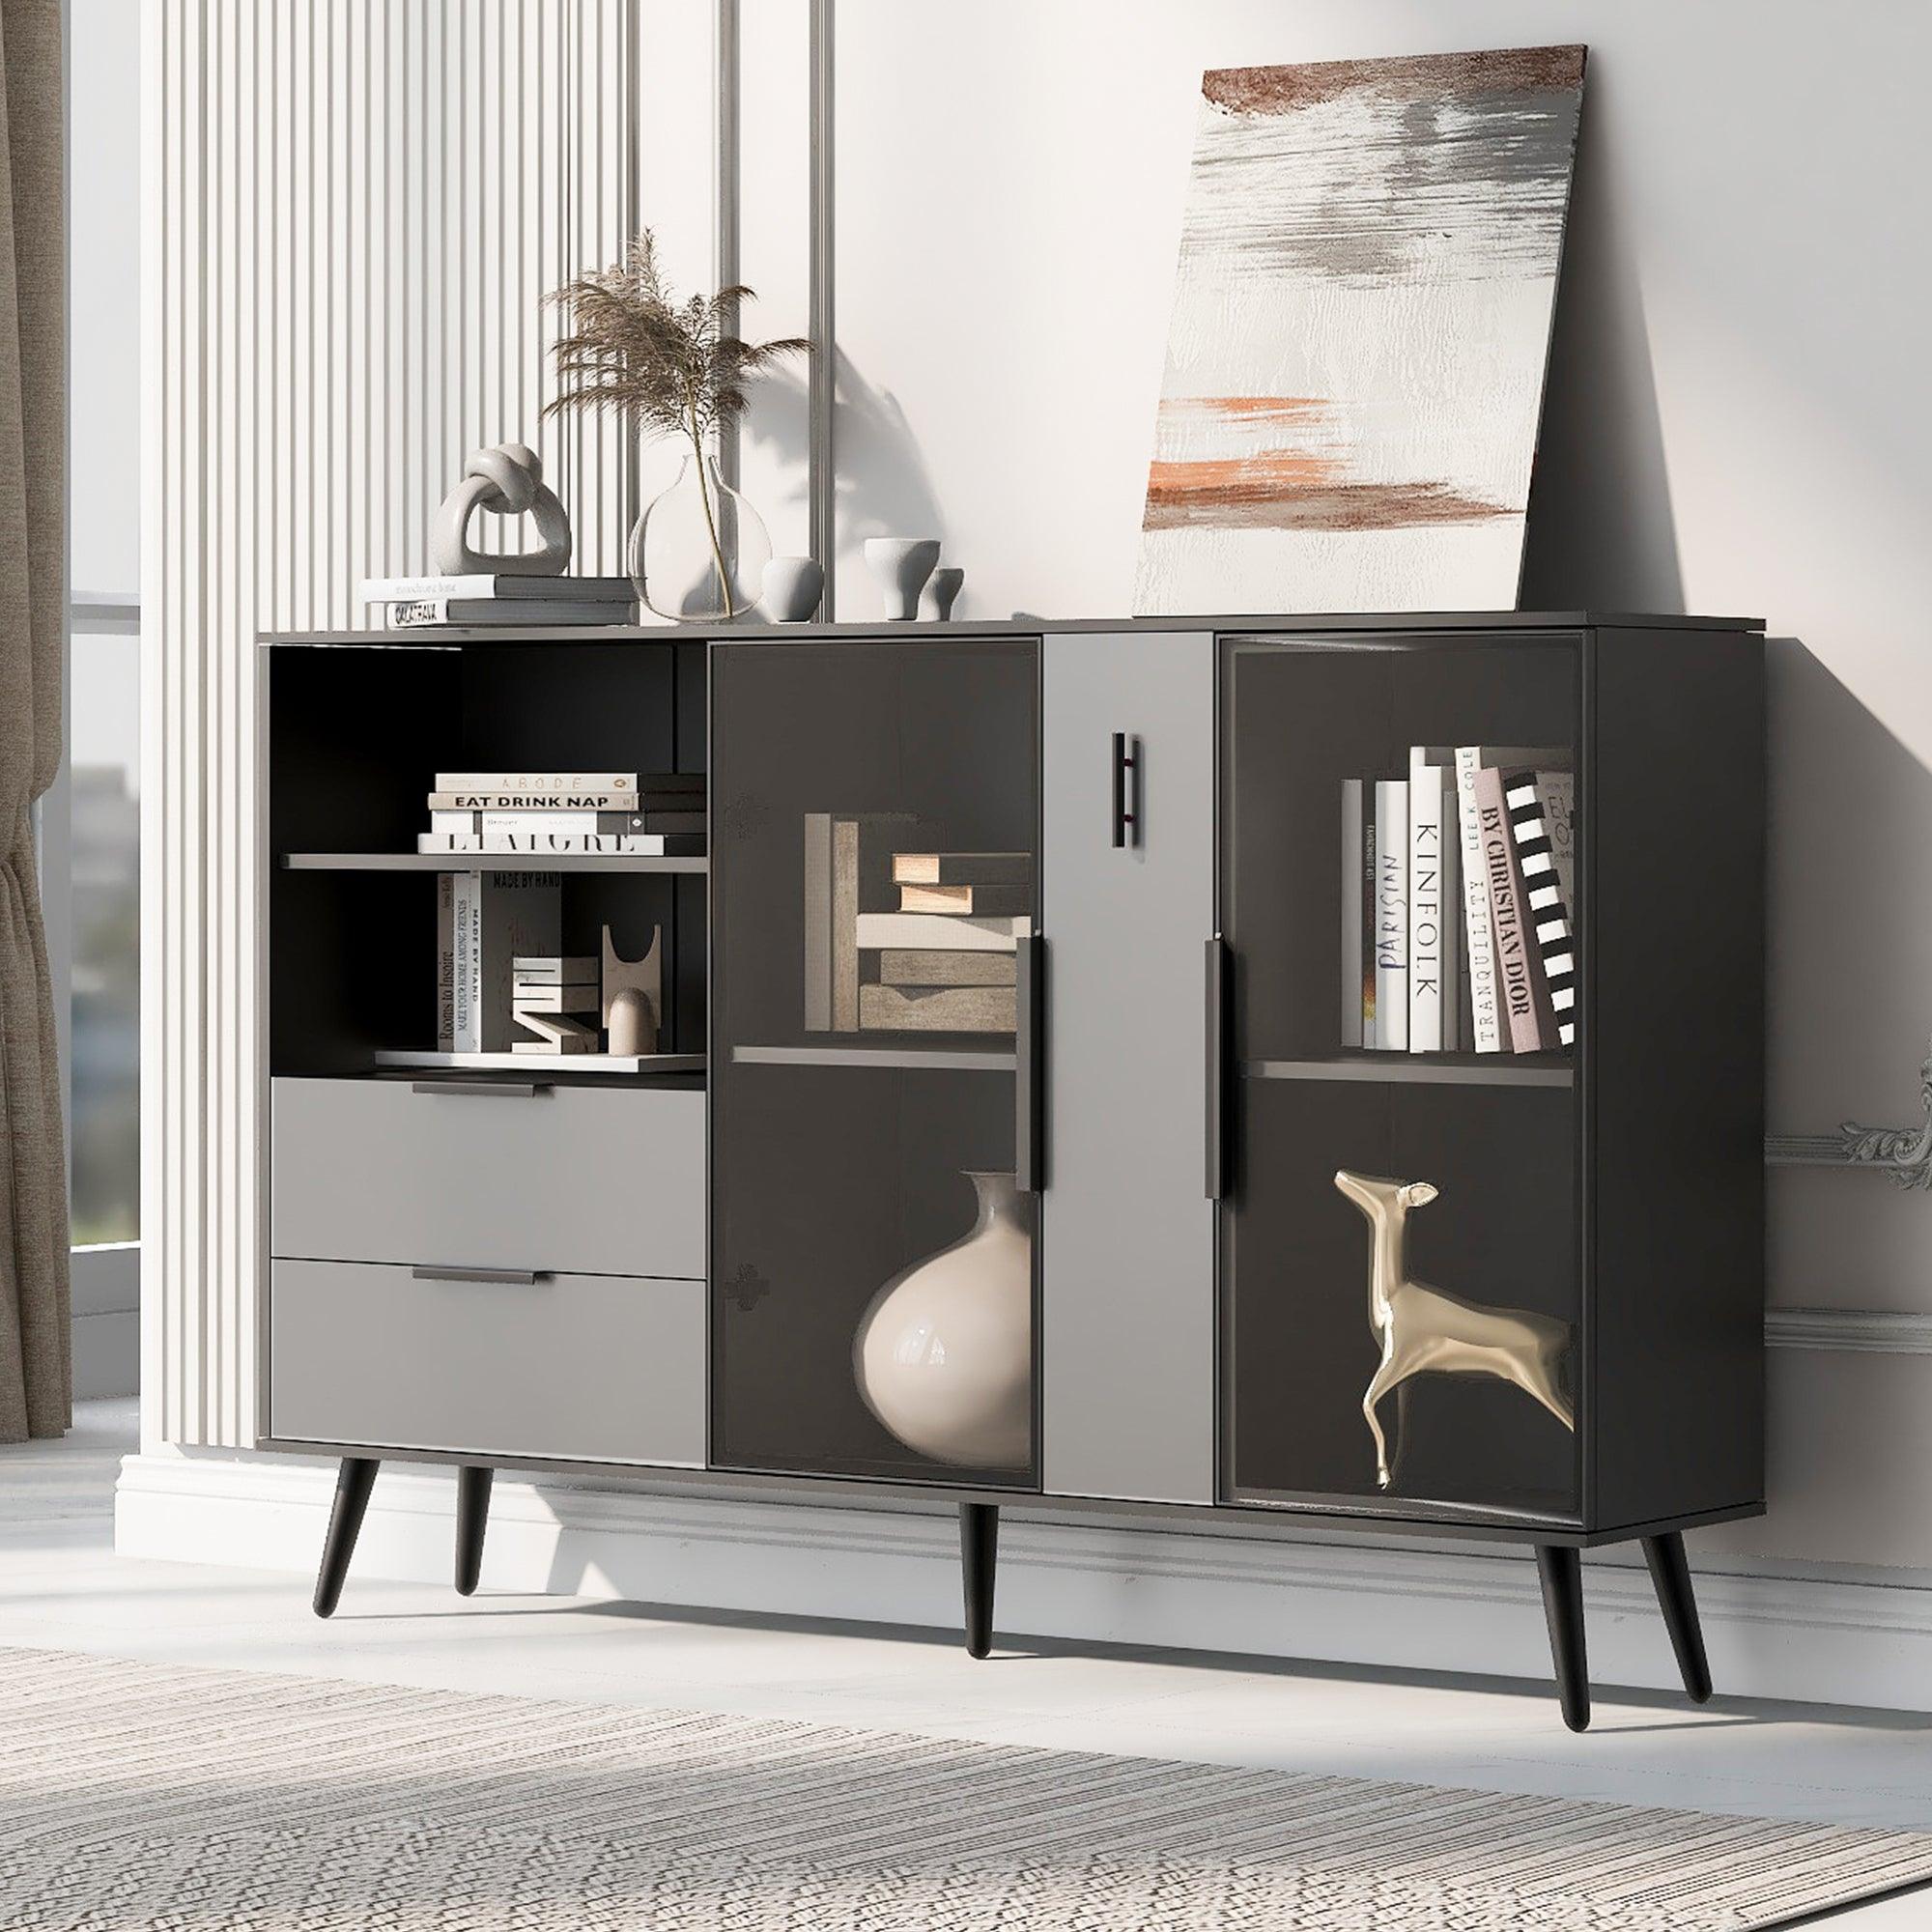 🆓🚛 Featured Two-Door Storage Cabinet With Two Drawers & Metal Handles, Suitable for Corridors, Entrances, Living Rooms, & Bedrooms